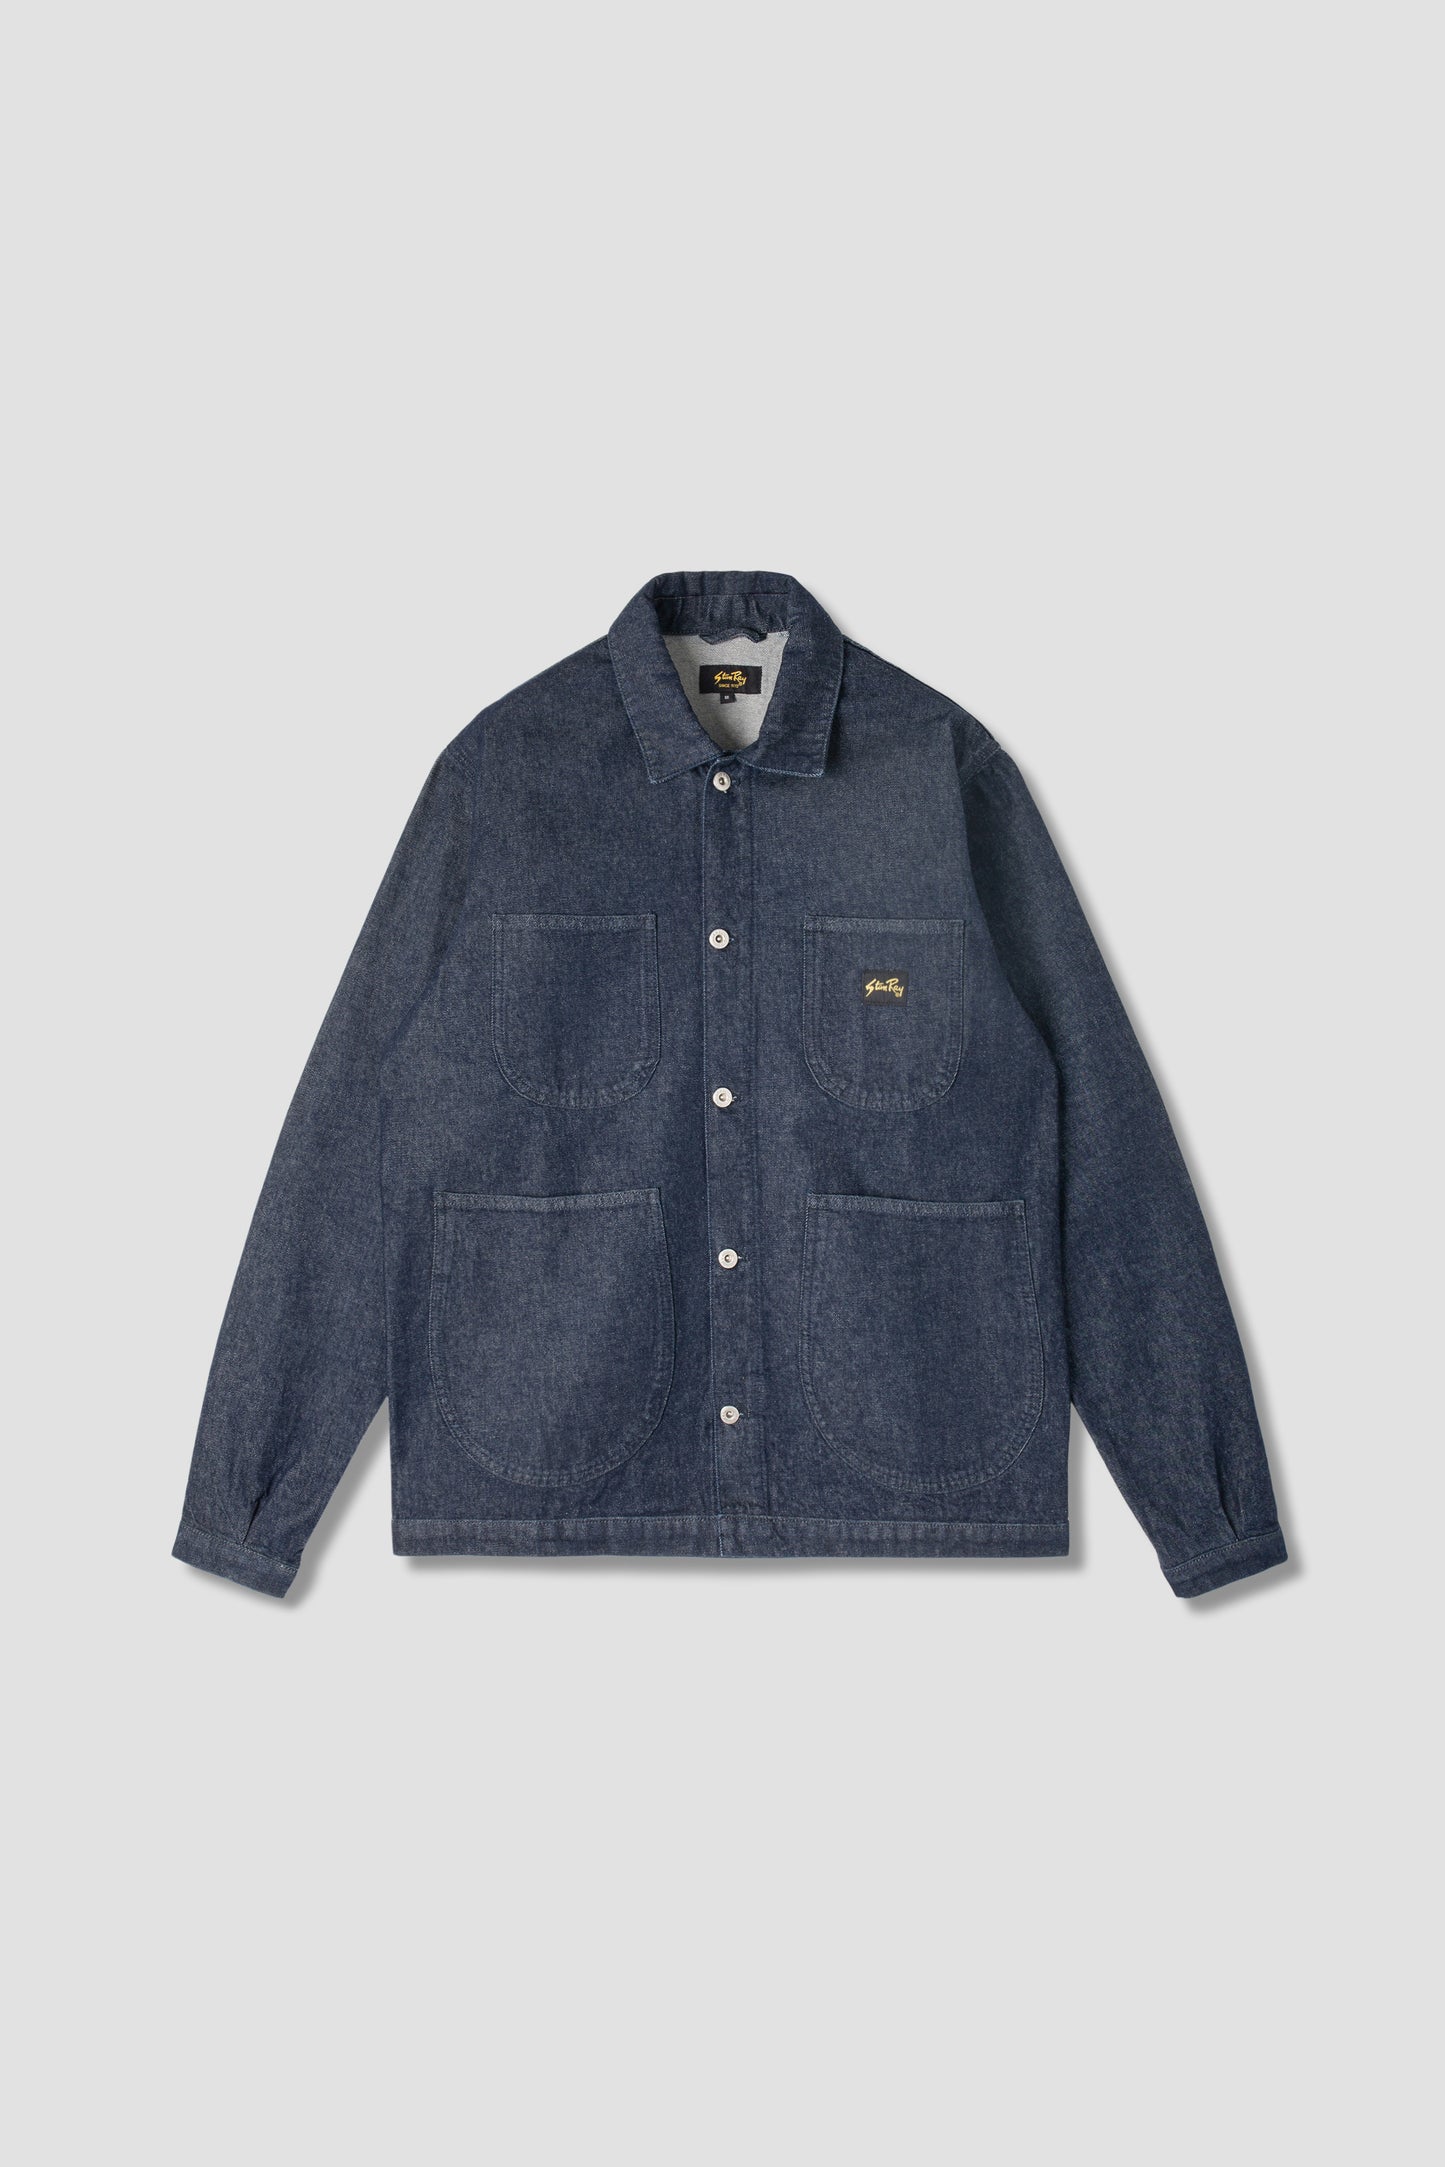 Coverall Jacket, Unlined (Raw Denim)